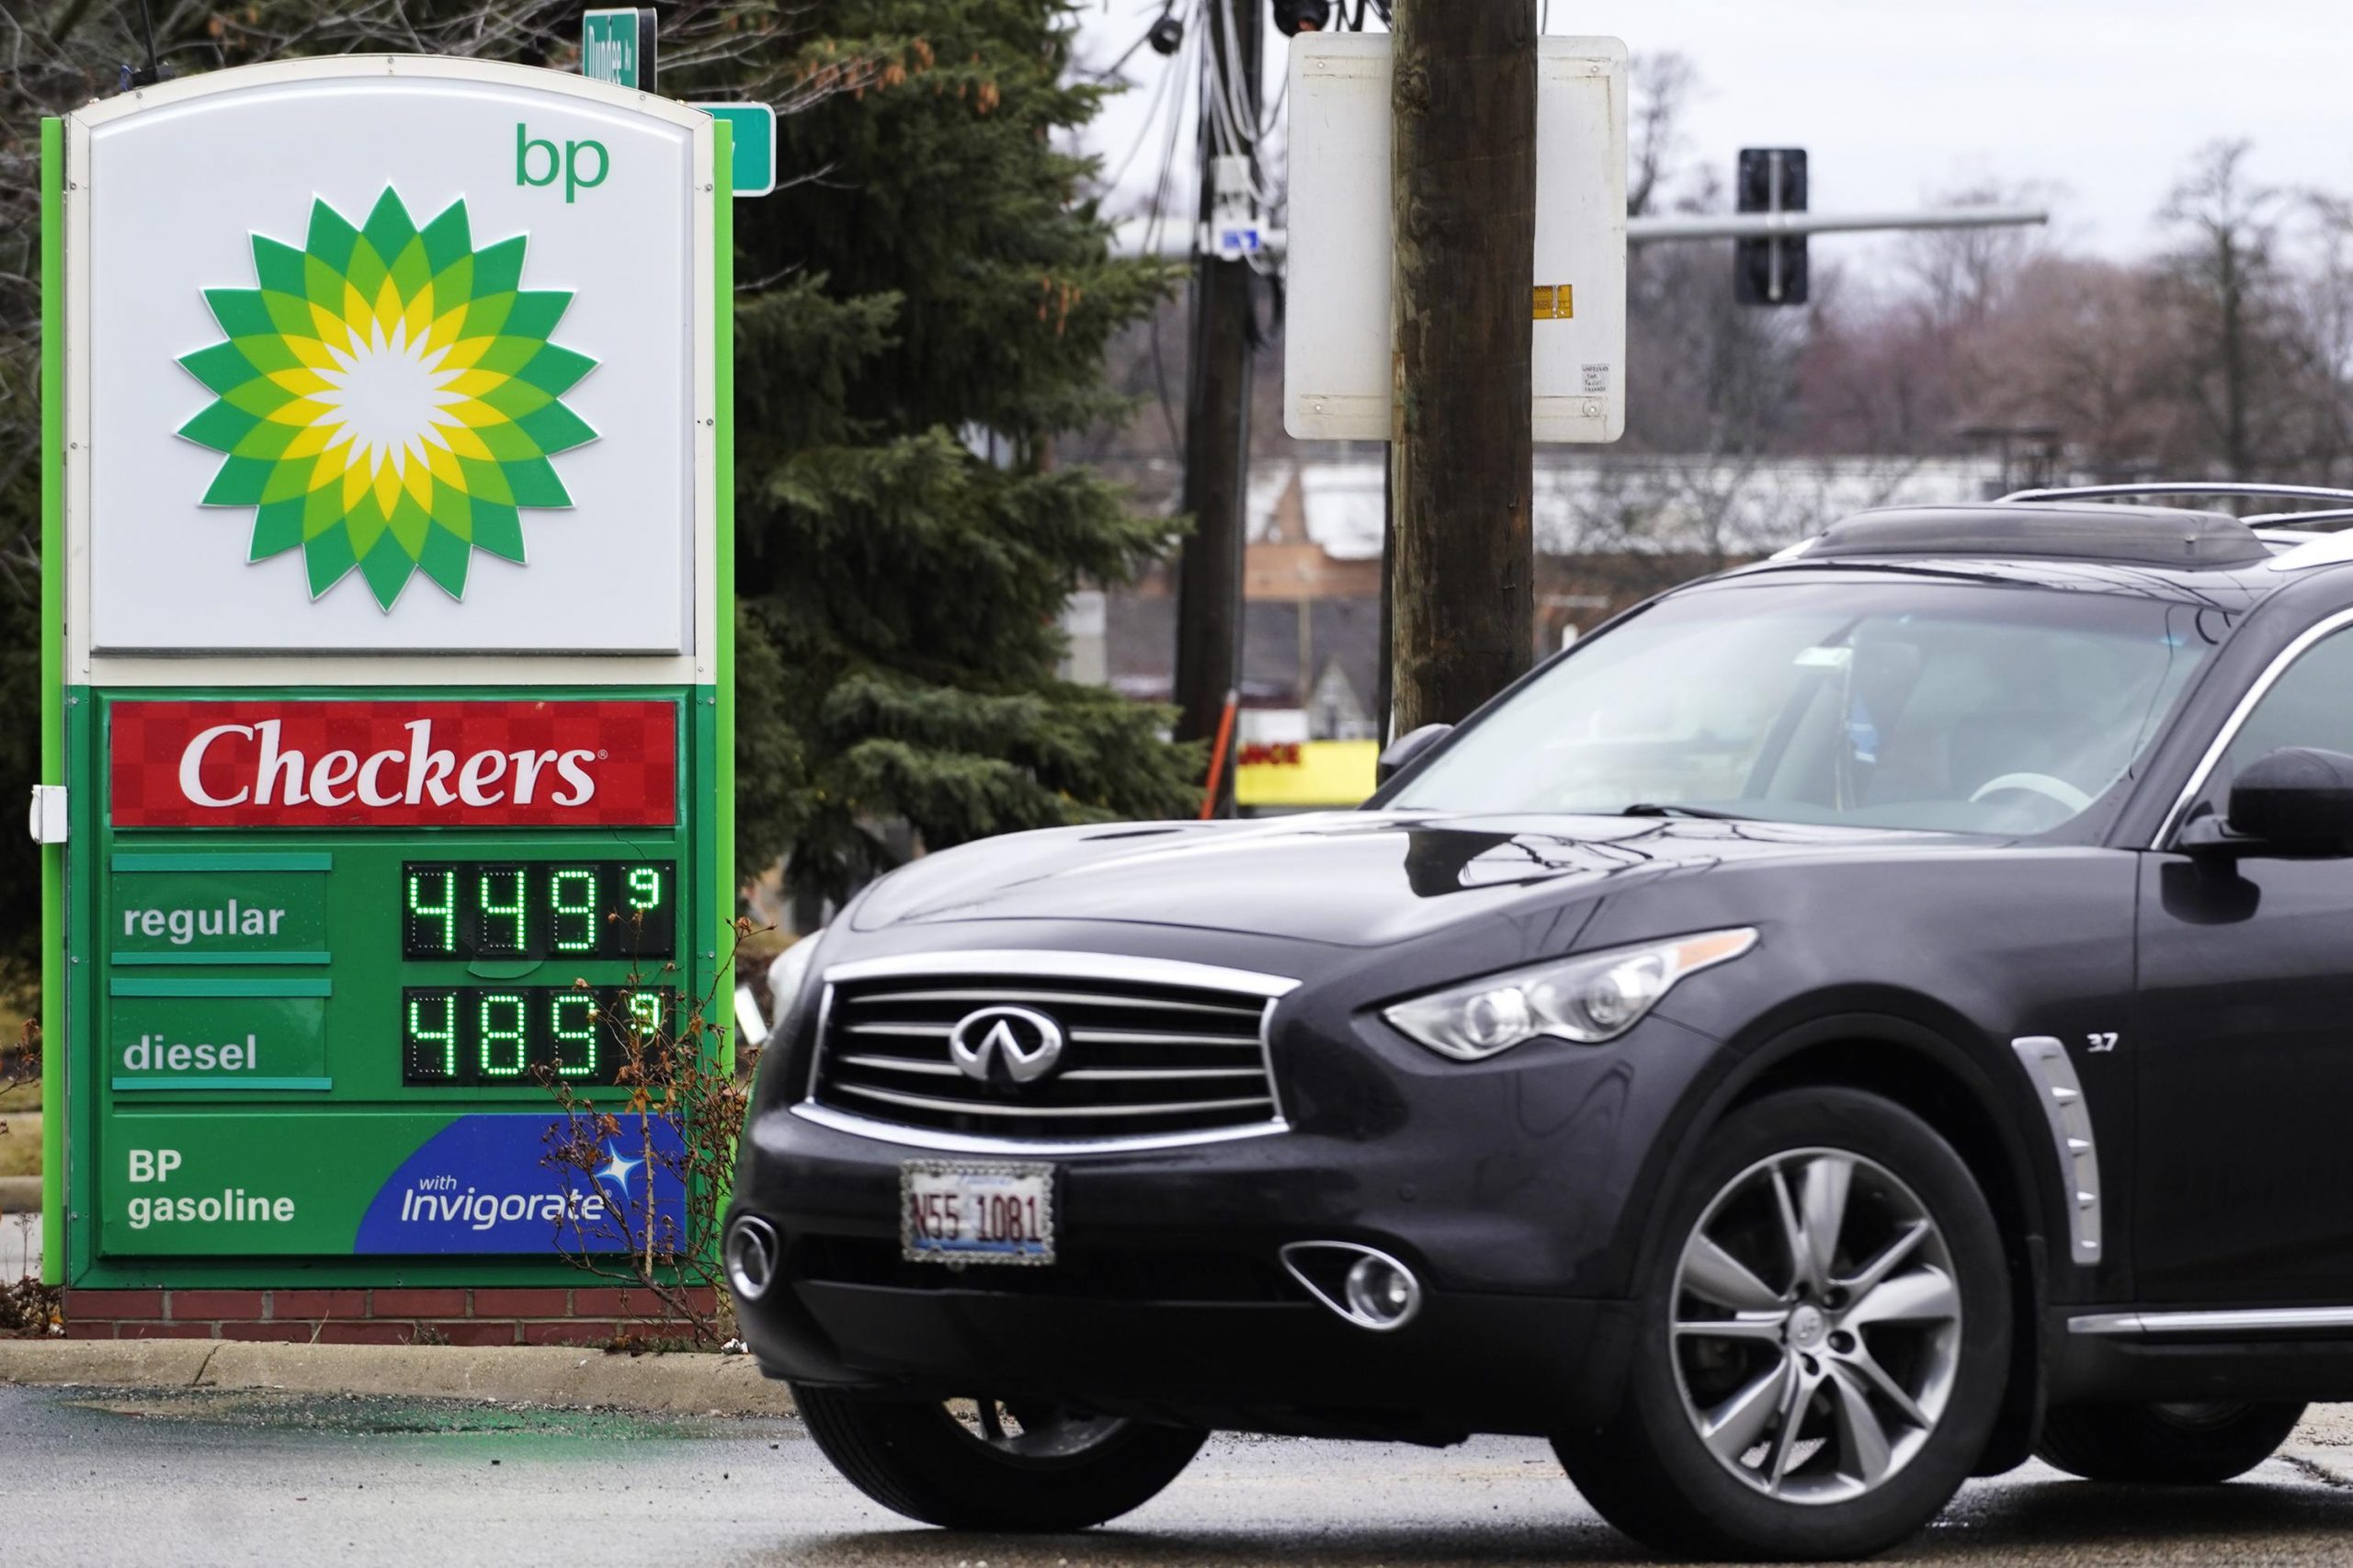 Drivers bemoan high gasoline prices with no relief in sight